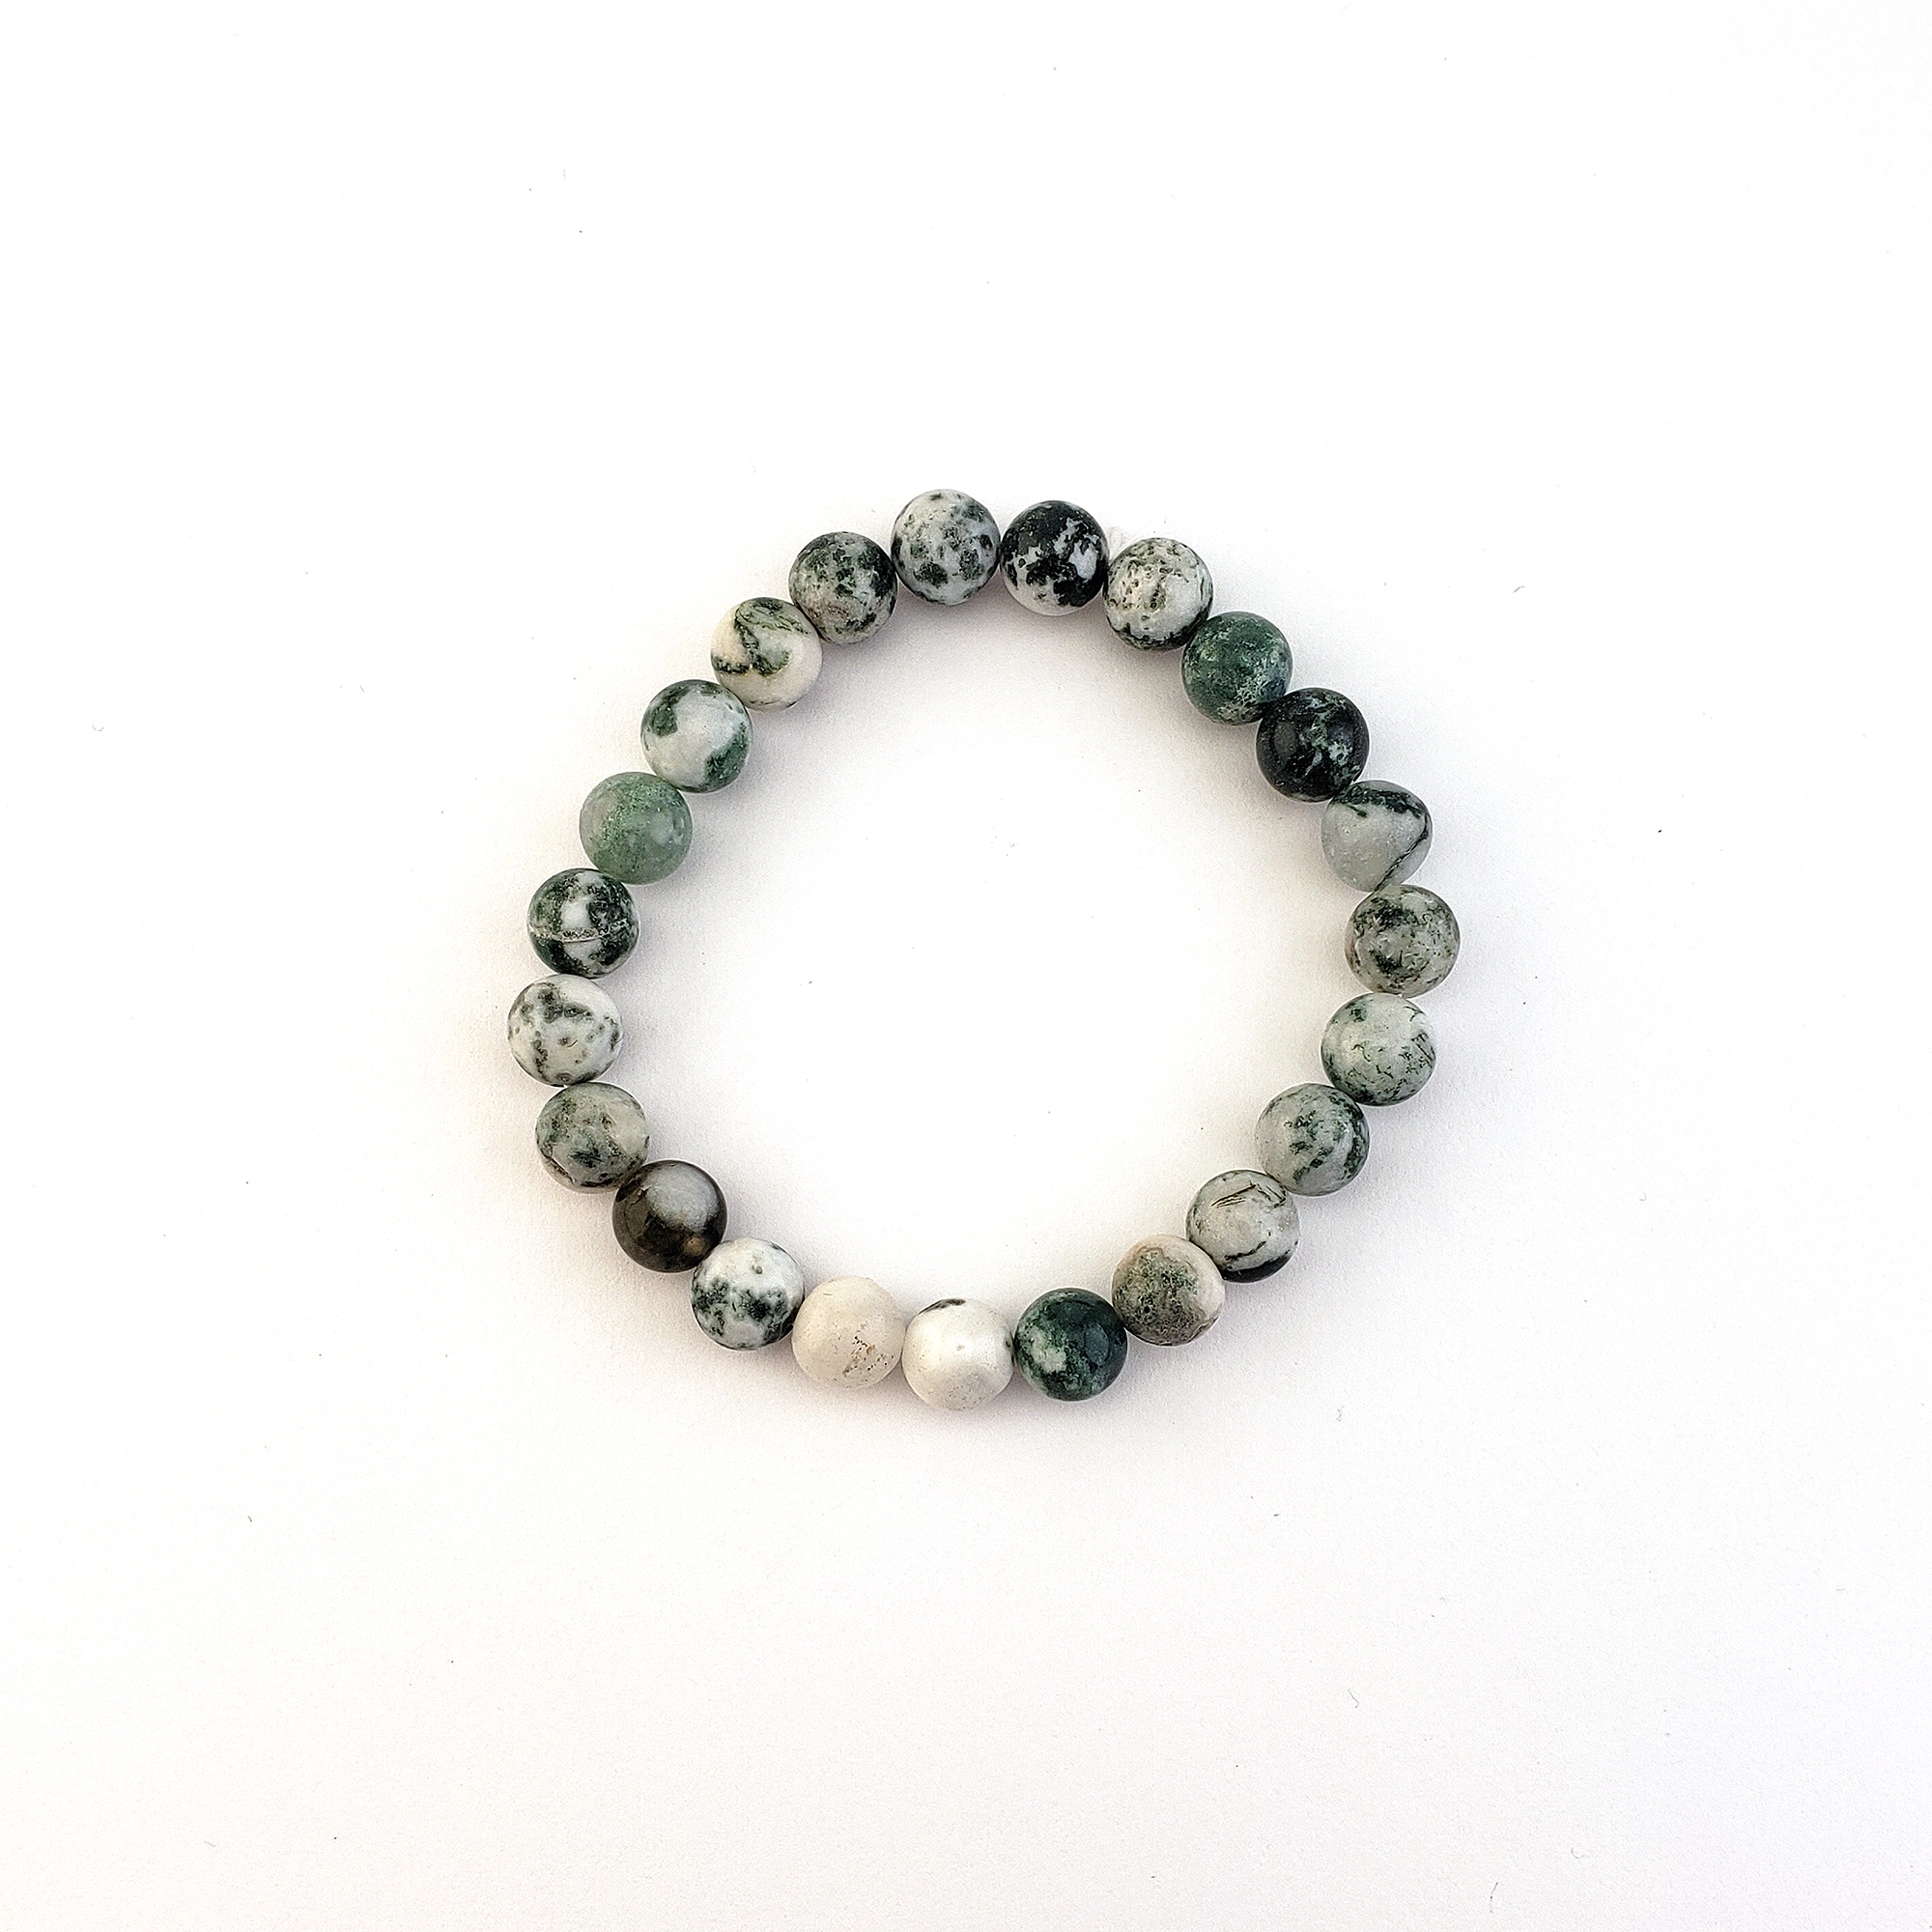 Tree Agate Natural Crystal 7-8mm Bead Bracelet - On White Background